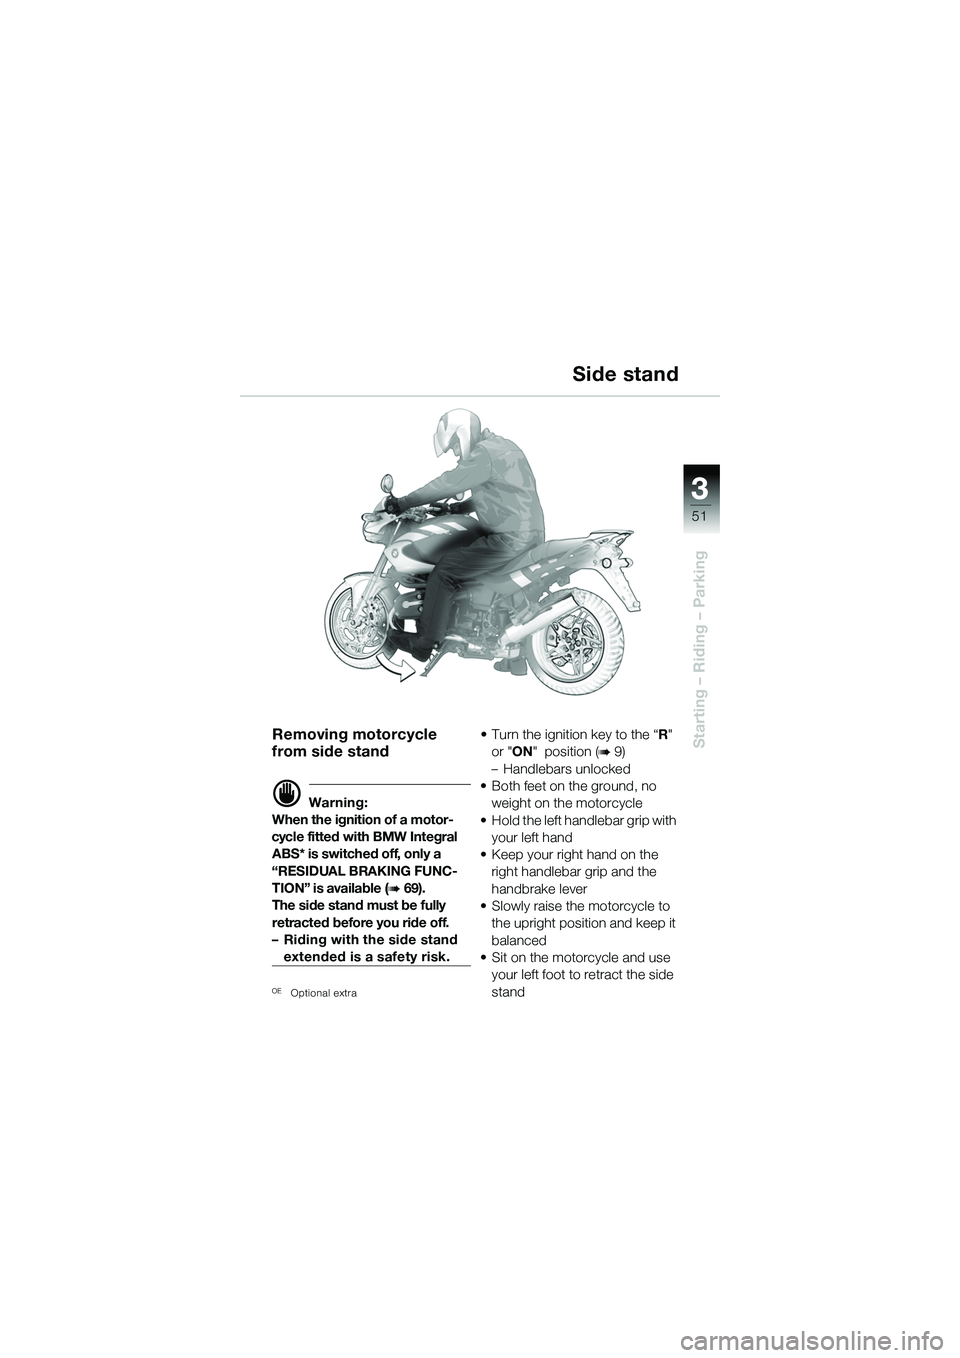 BMW MOTORRAD R 1150 R 2002  Riders Manual (in English) 3
51
3
Starting – Riding – ParkingRemoving motorcycle 
from side stand
d Warning:
When the ignition of a motor-
cycle fitted with BMW Integral  ABS* is switched off, only a 
“RESIDUAL BRAKING FU